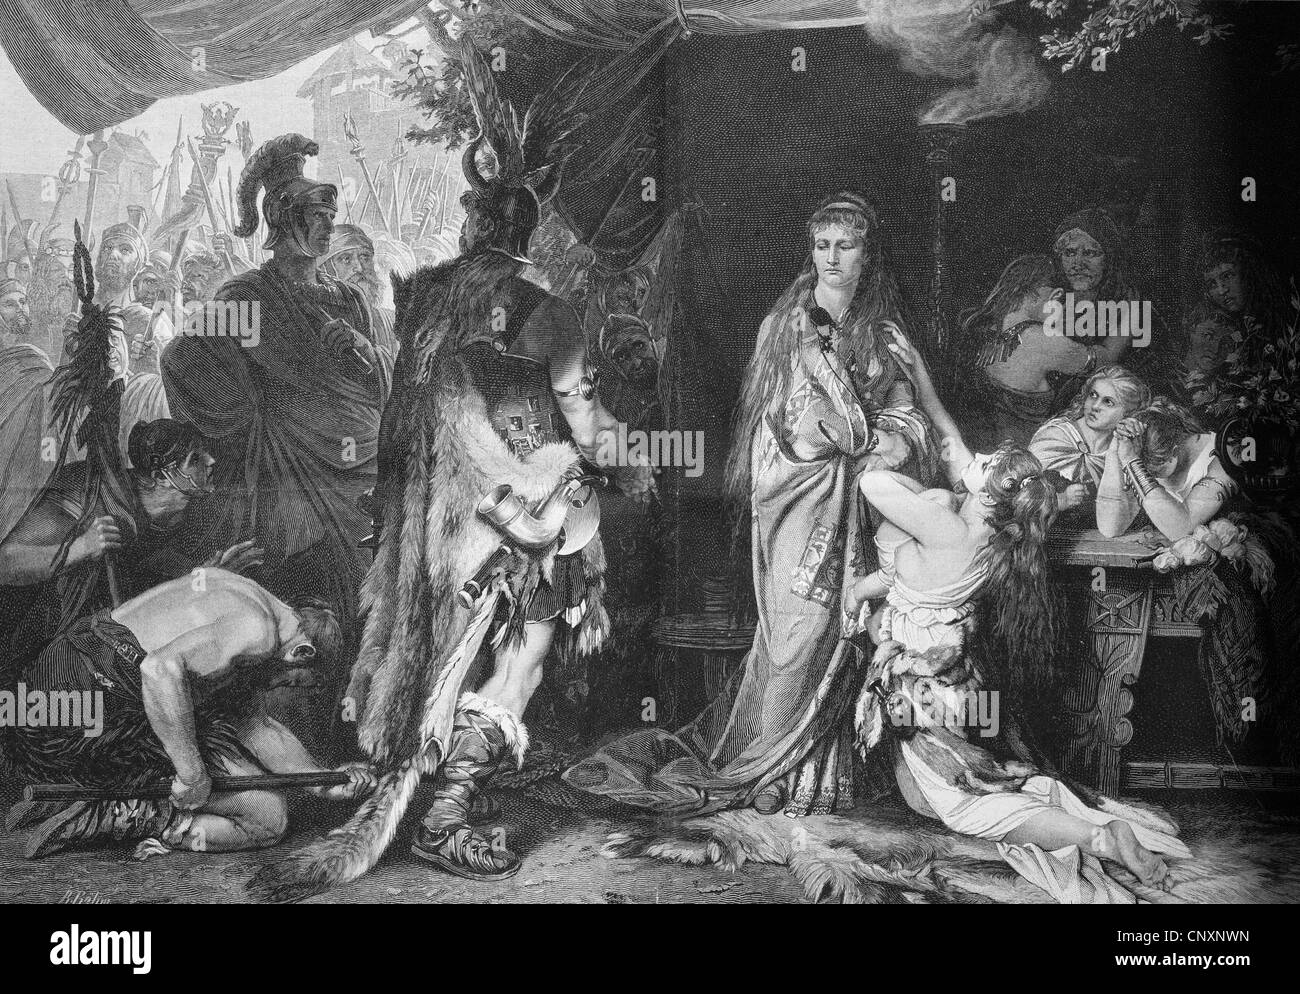 Tusnelda being handed over from her father Segestes to the Roman general Germanicus, circa 17 AD, a daughter of the Cheruscan pr Stock Photo